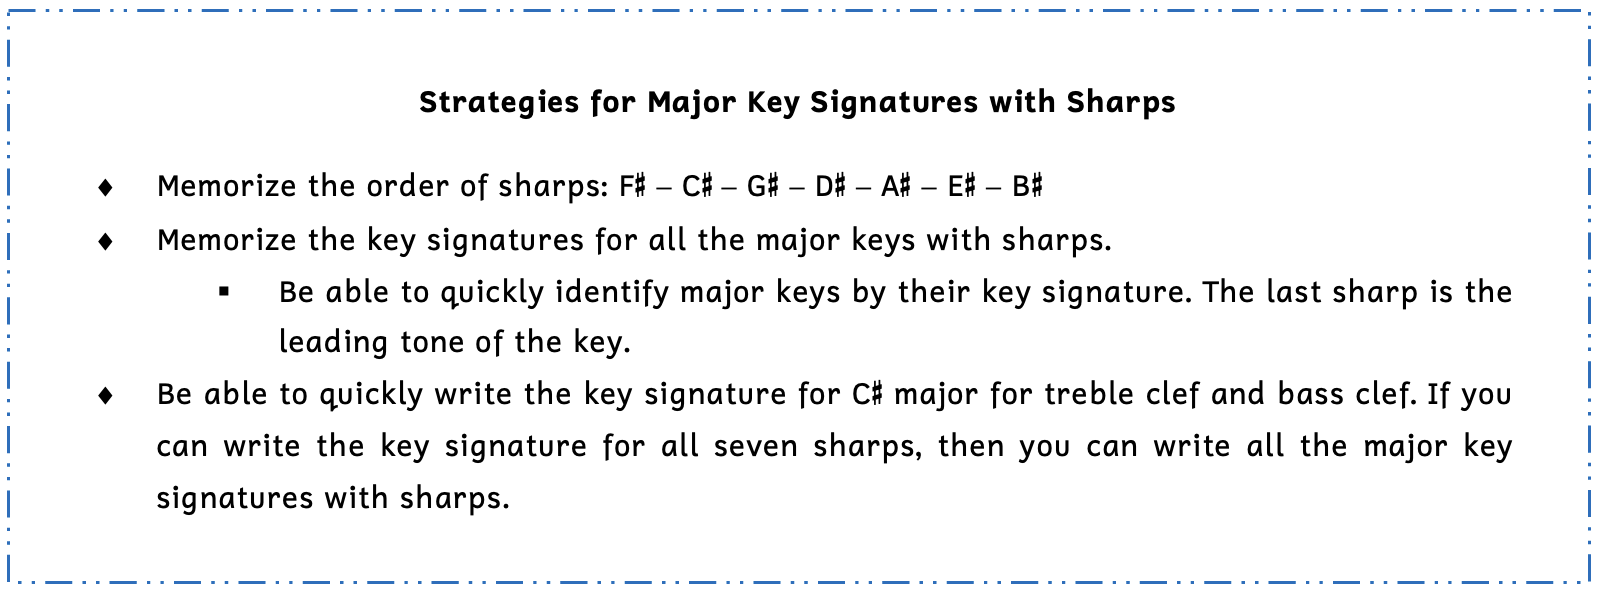 Summary box for strategies to identify major key signatures with sharps. First, memorize the order of sharps: F-sharp, C-sharp, G-sharp, D-sharp, A-sharp, E-sharp, and B-sharp. Second, memorize the key signatures for all the major keys with sharps. Be able to quickly identify major keys by their key signature. The last sharp is the leading tone of the key. Third, be able to quickly write the key signature for C-sharp major for treble clef and bass clef. If you can write the key signature for all seven sharps, then you can write all the major key signatures with sharps.